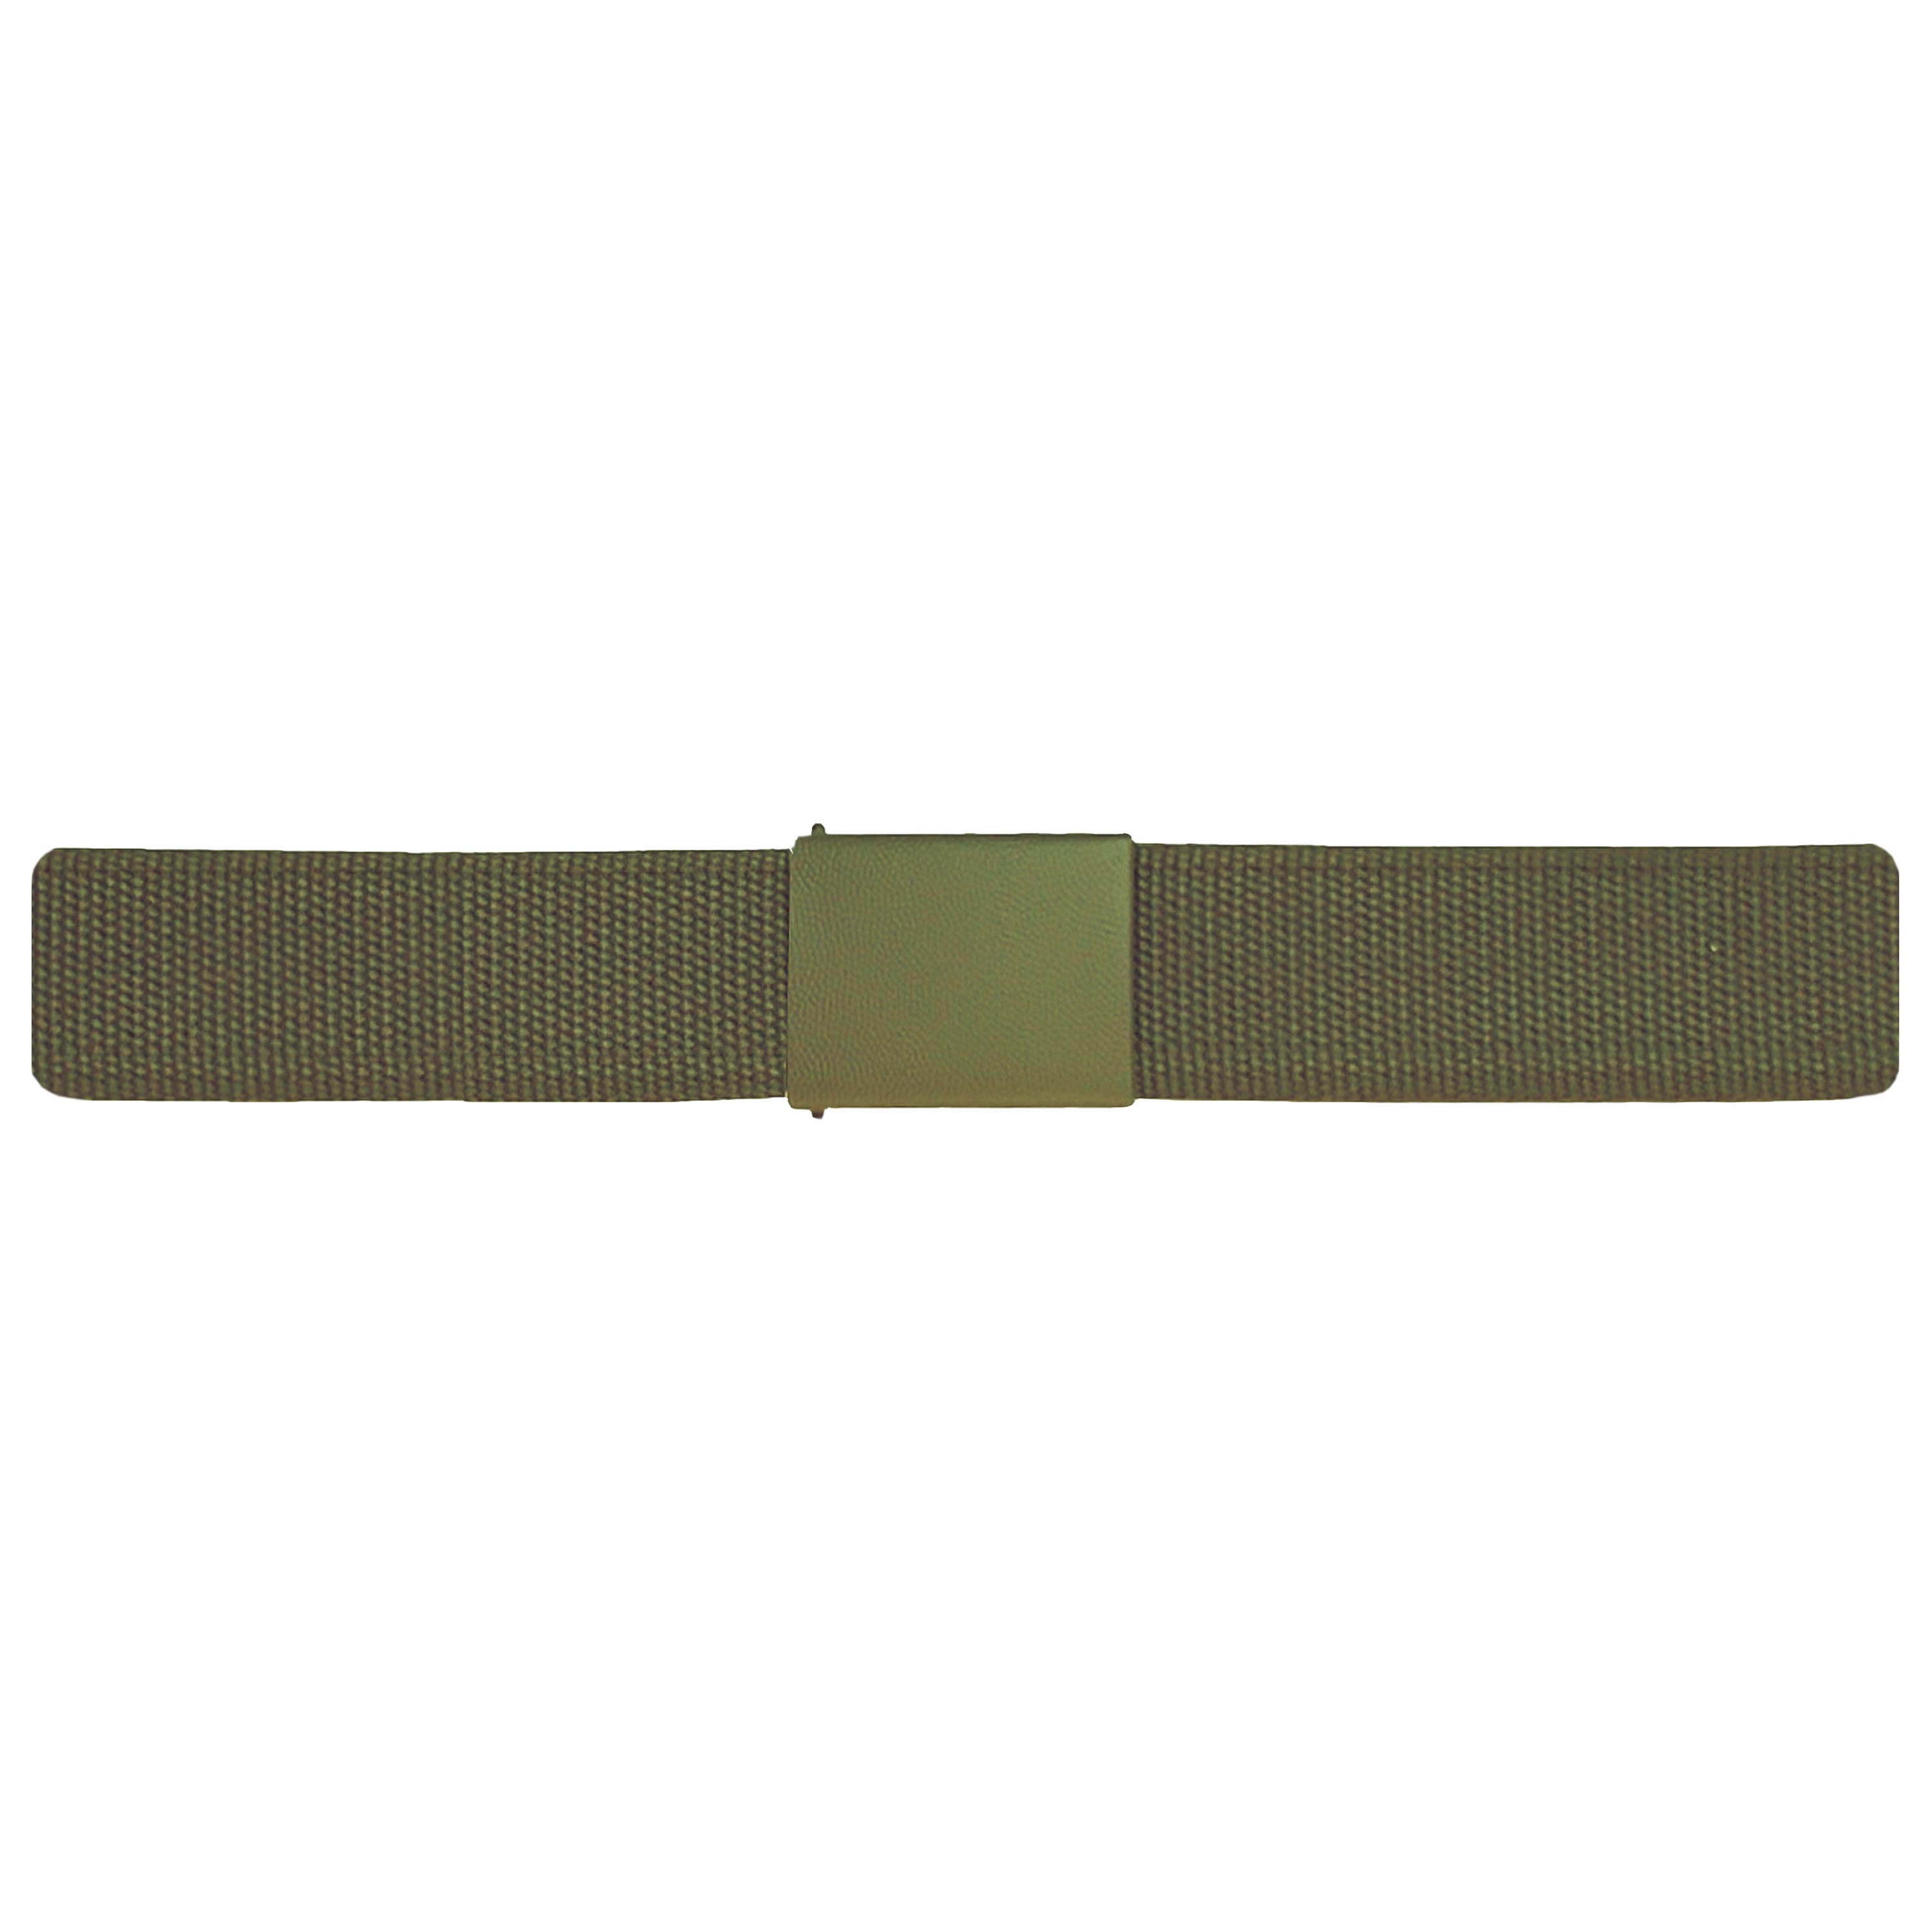 German Army Belt German | Accessories Belts | Textile Clothing | Used Textile Belt | olive olive Army Used